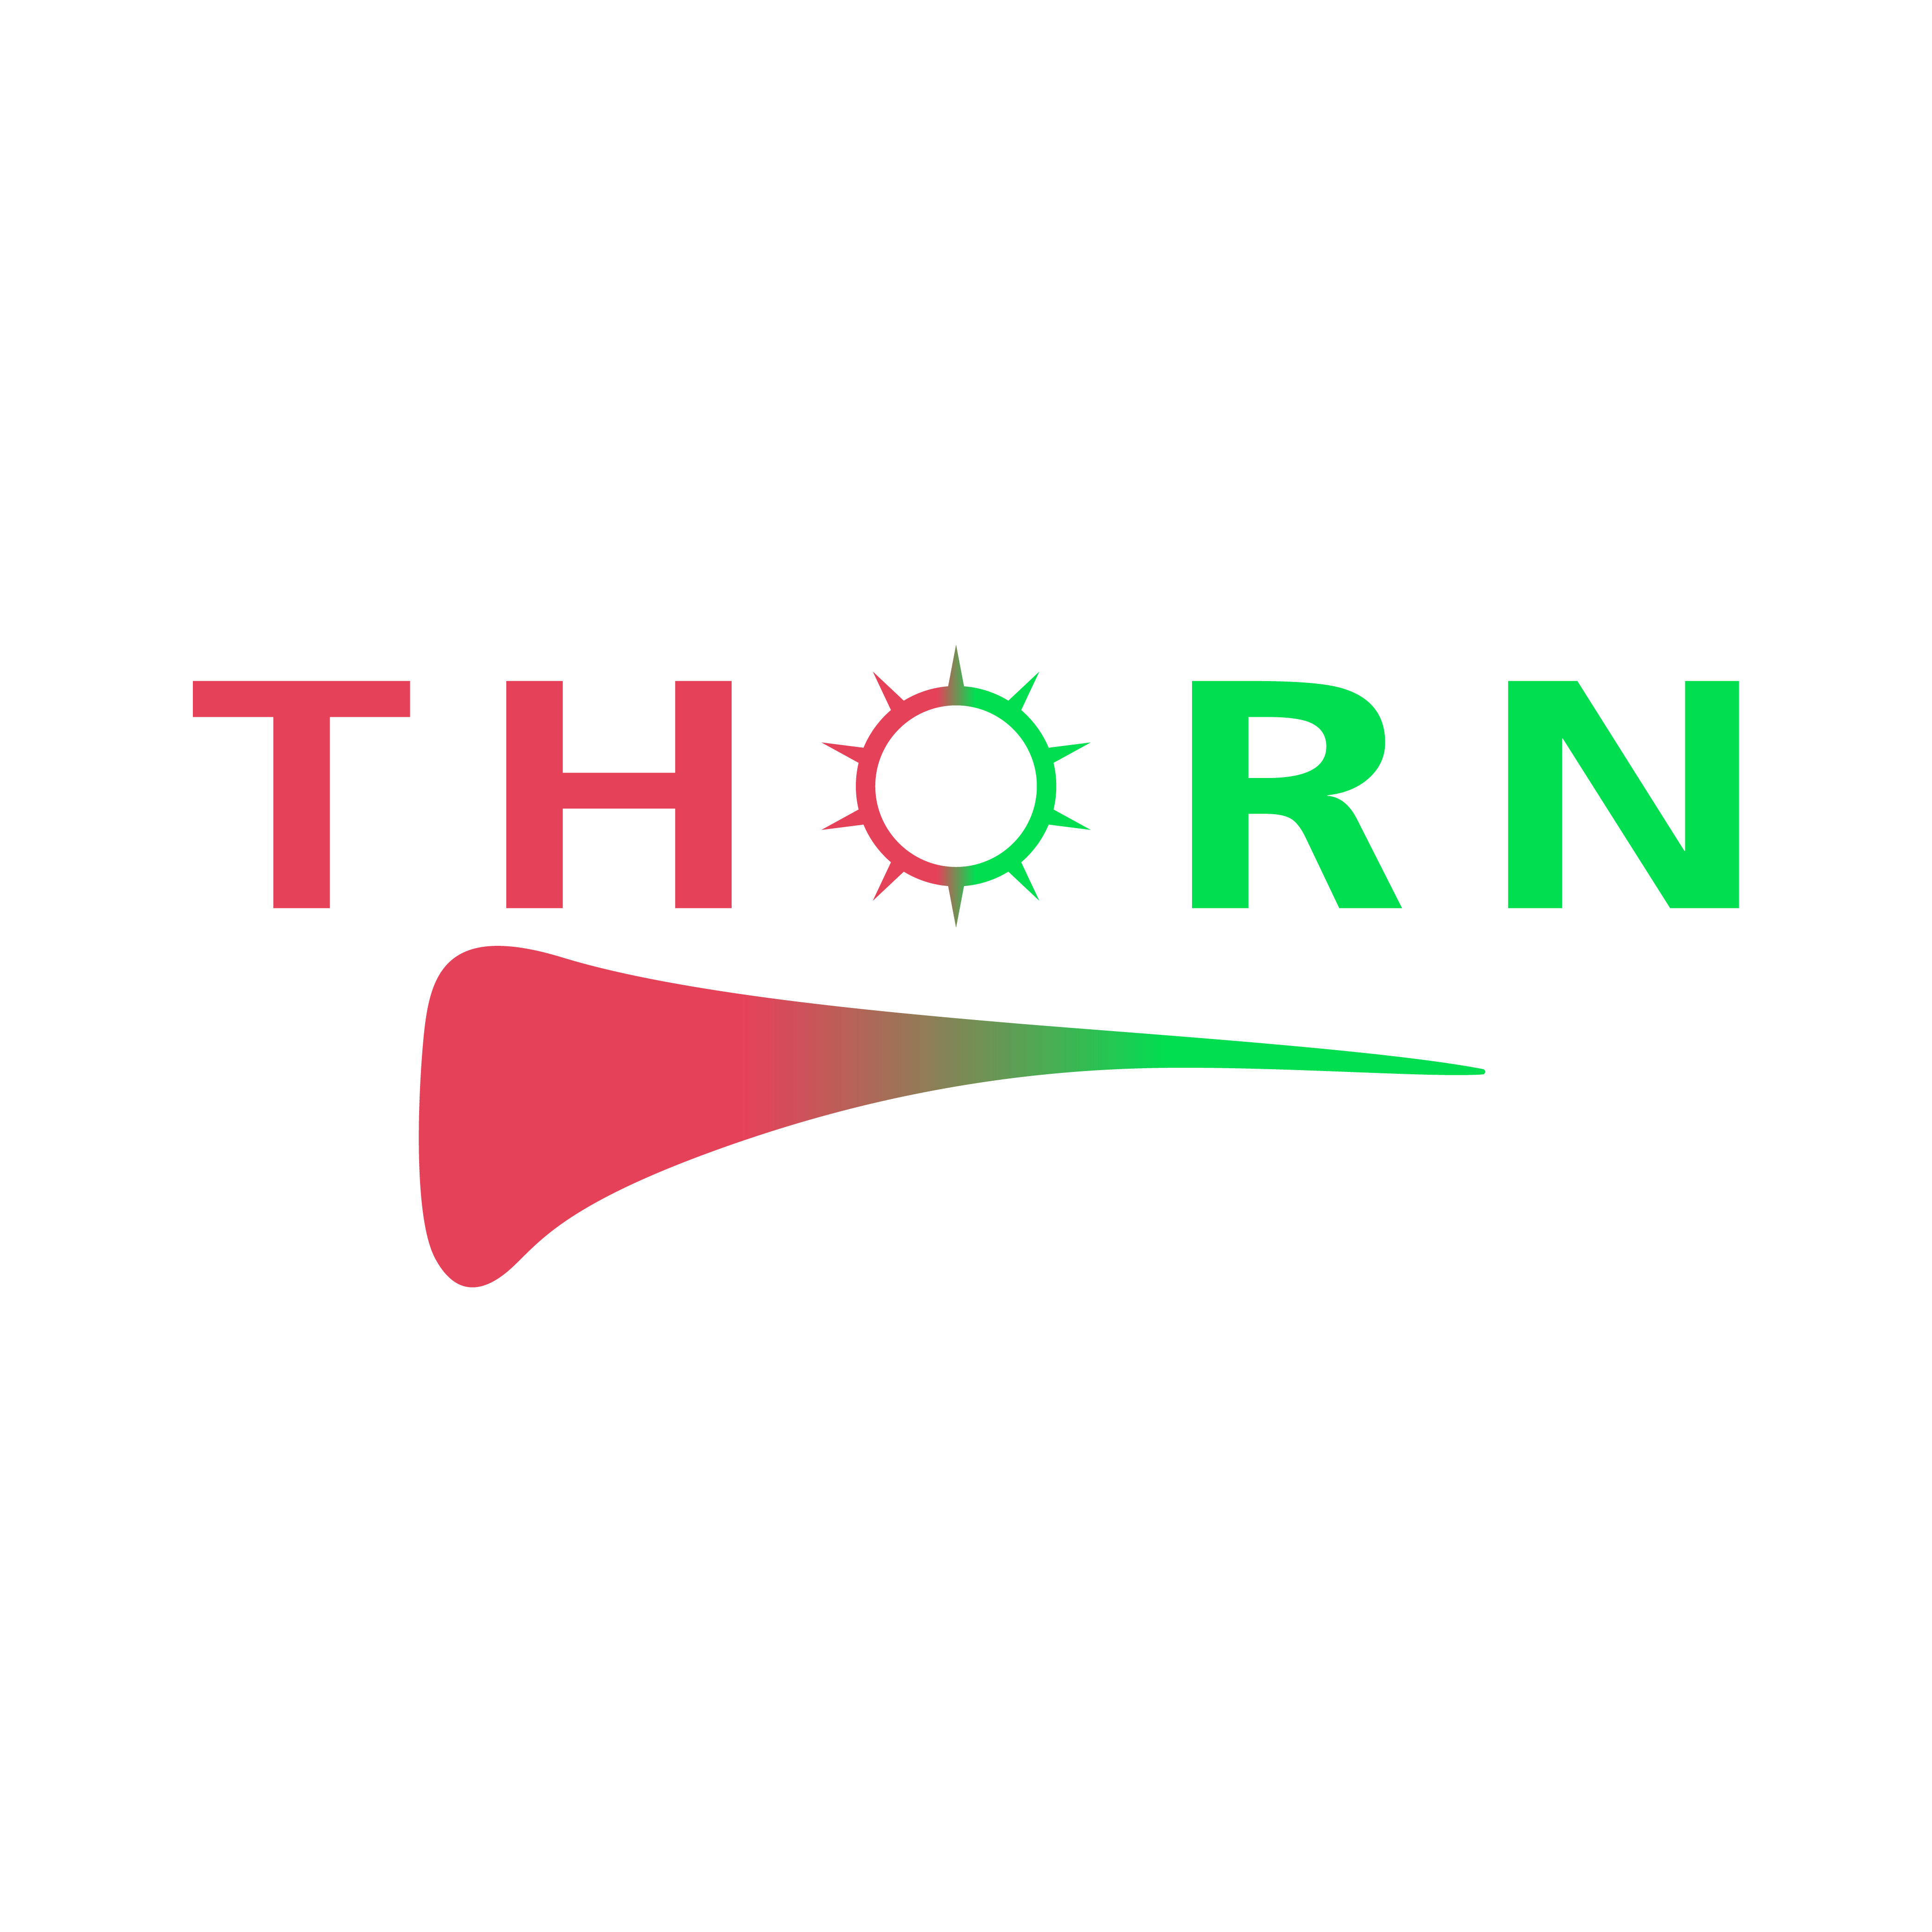 Thorn Gardening & landscaping in Thanet